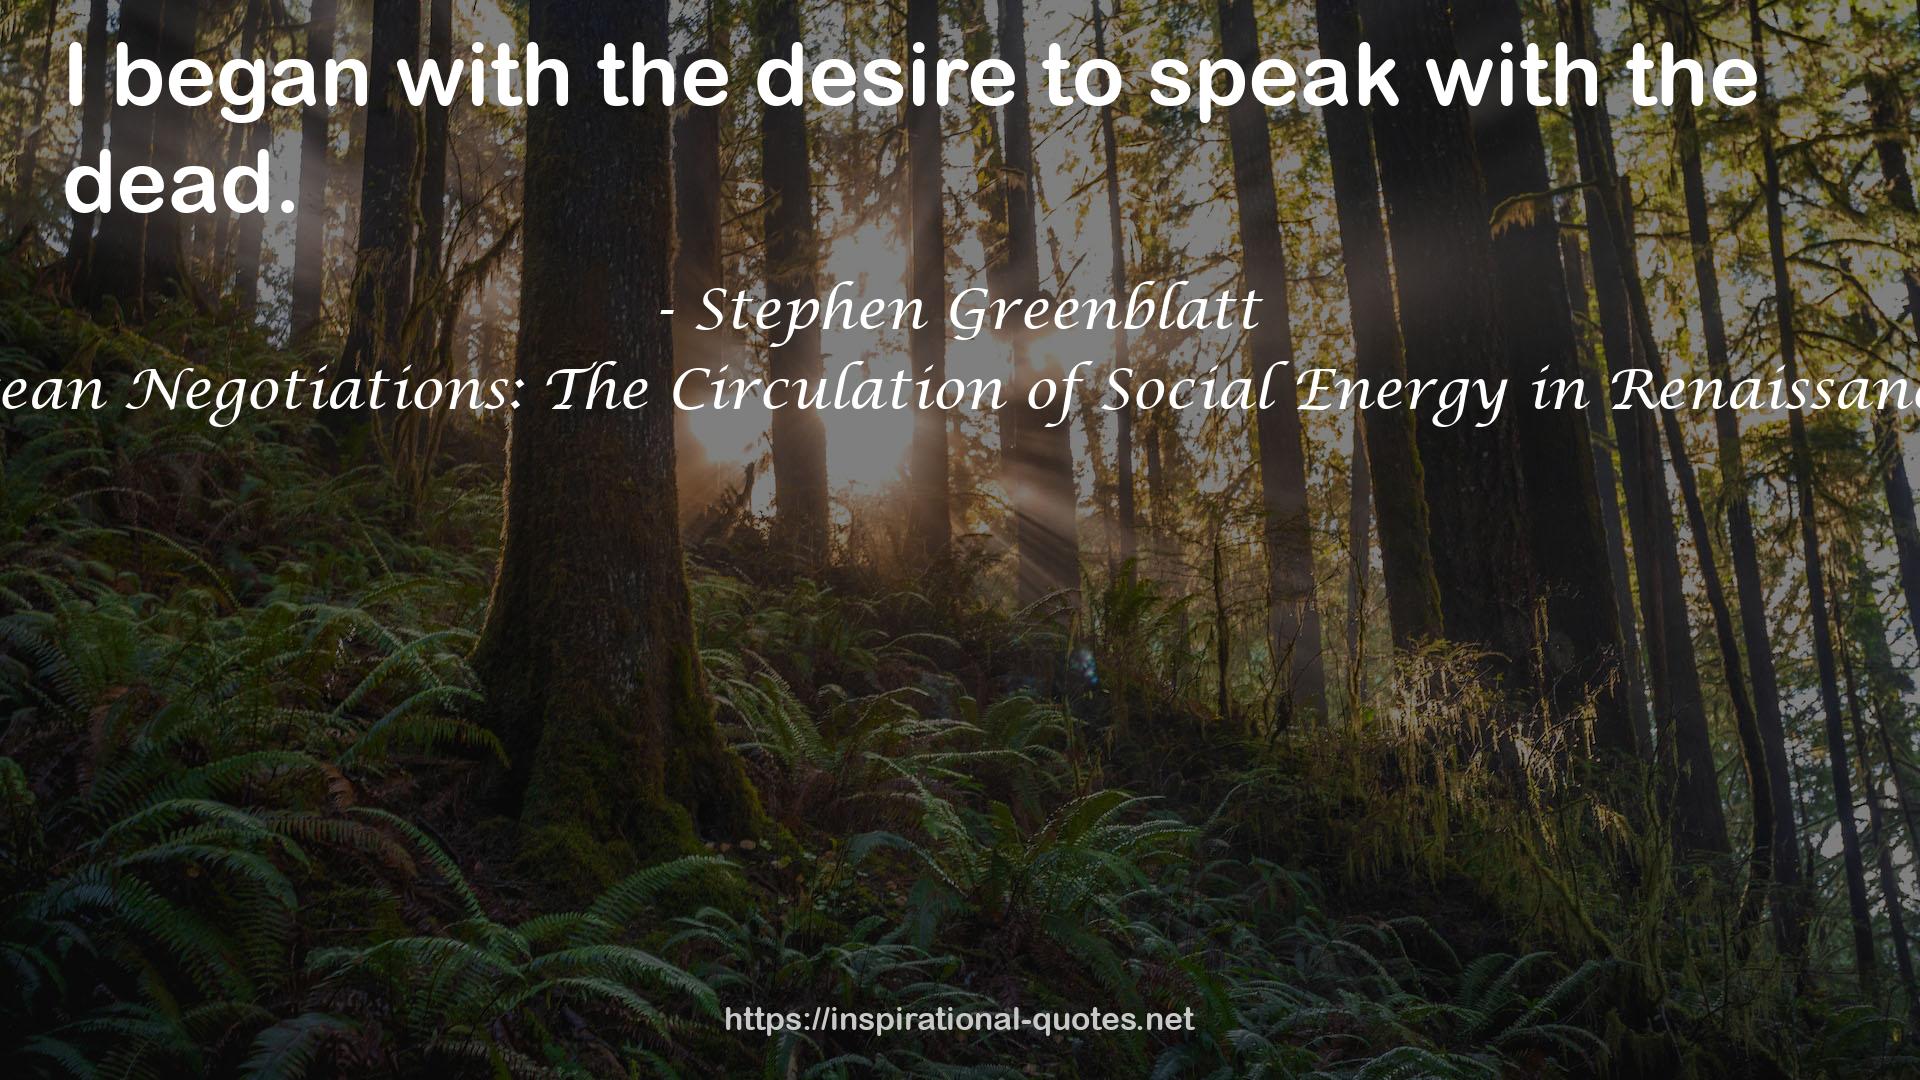 Shakespearean Negotiations: The Circulation of Social Energy in Renaissance England QUOTES